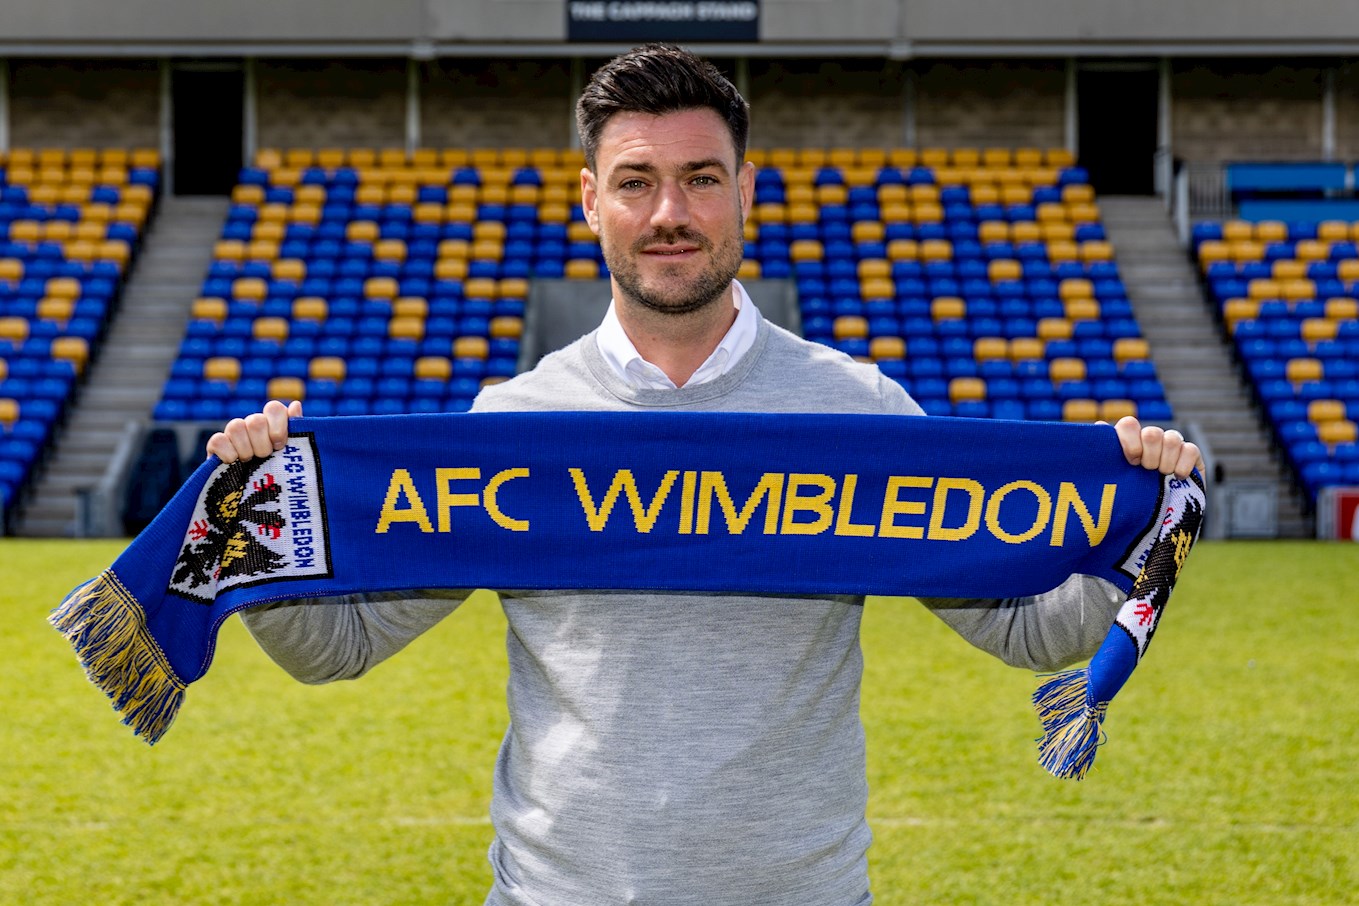 The wait is over! New manager confirmed - News - AFC Wimbledon